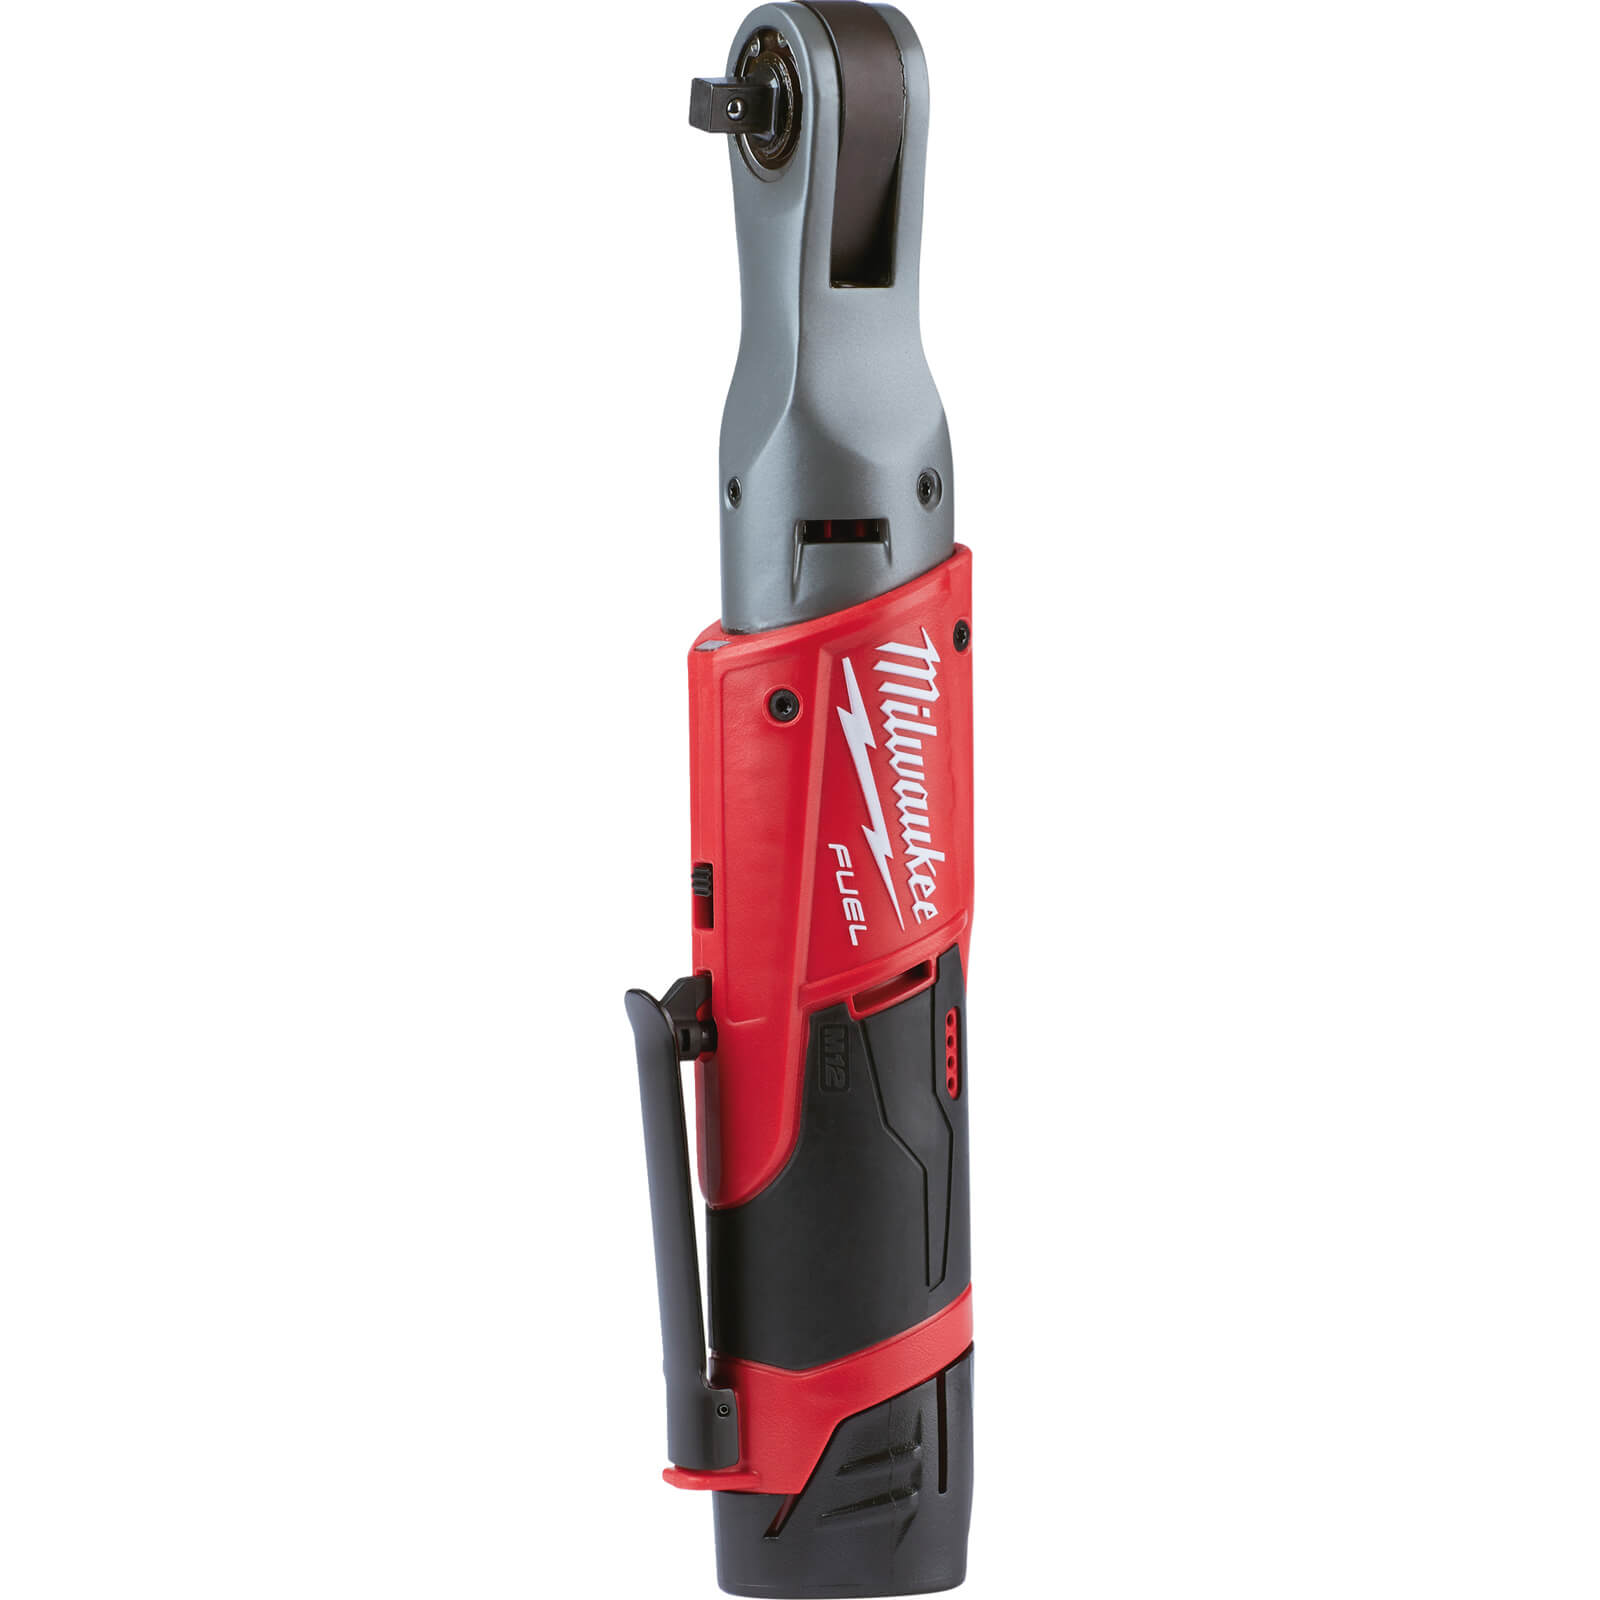 Image of Milwaukee M12 FIR38 Fuel 12v Cordless Brushless 3/8" Drive Ratchet Wrench 1 x 2ah Li-ion Charger Bag